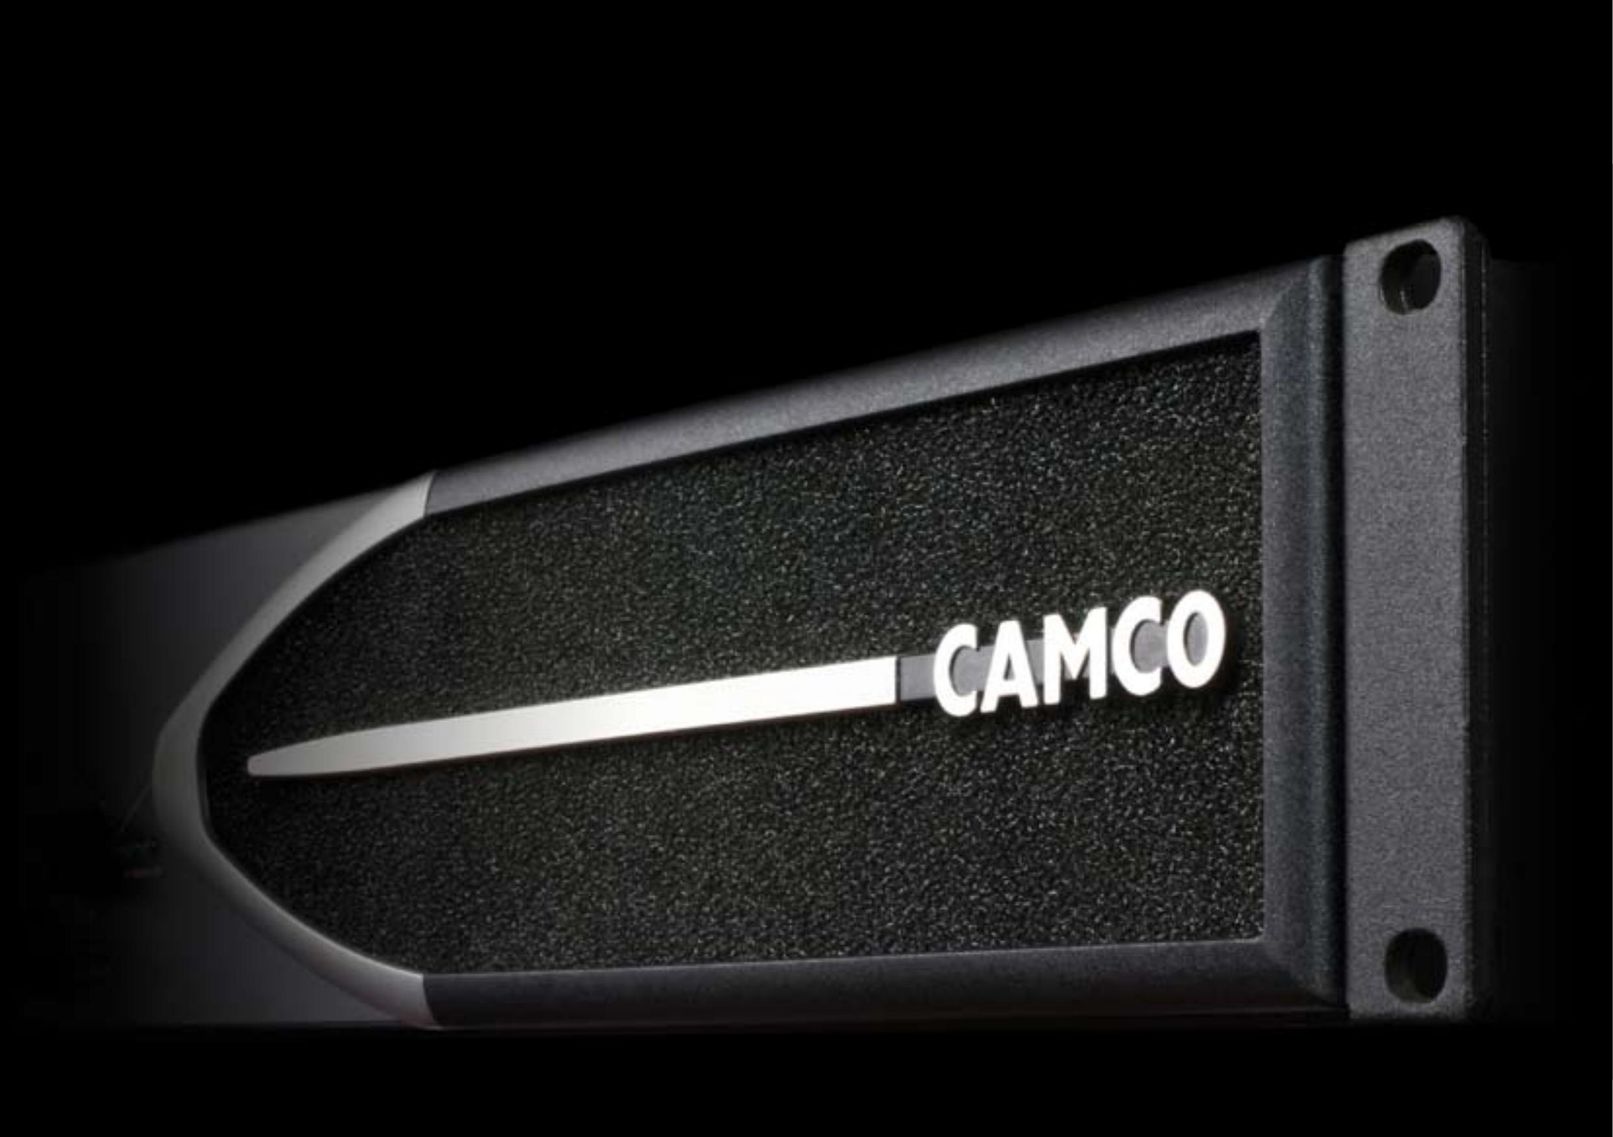 Camco 26 dB Stereo Amplifier User Manual